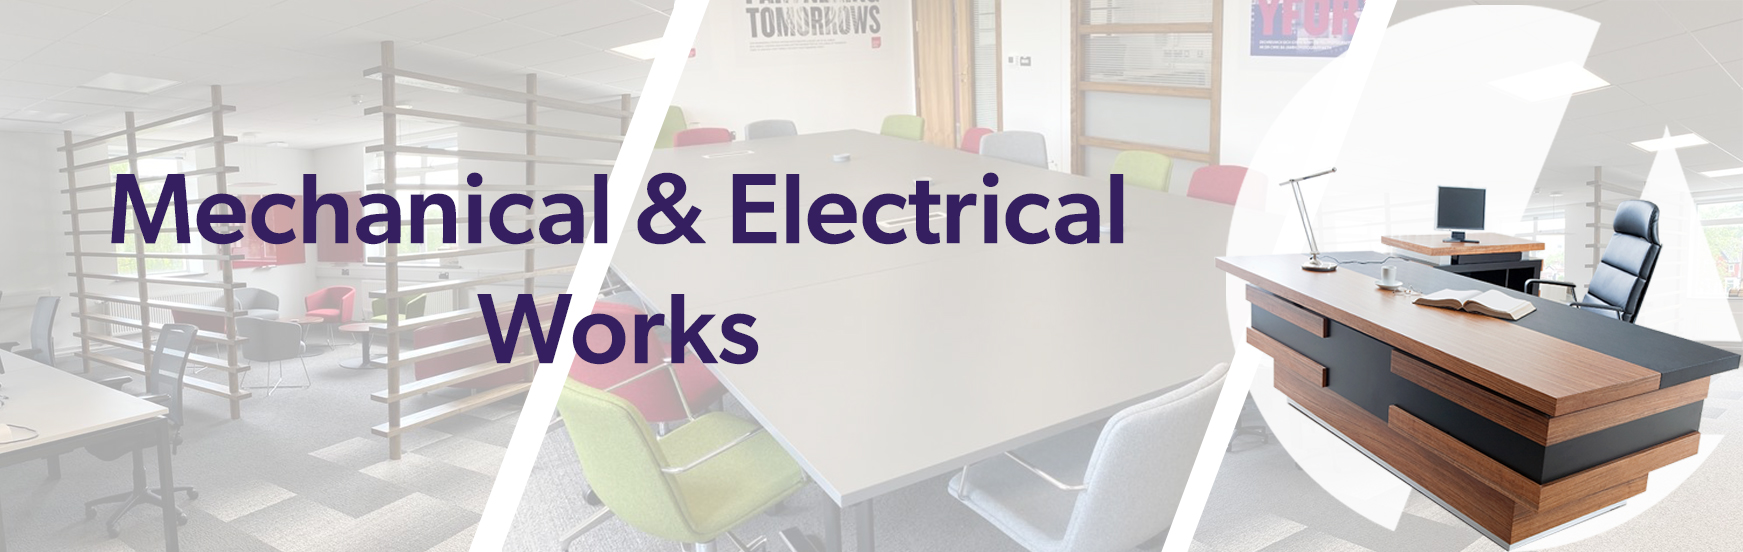 mechanical electrical works office